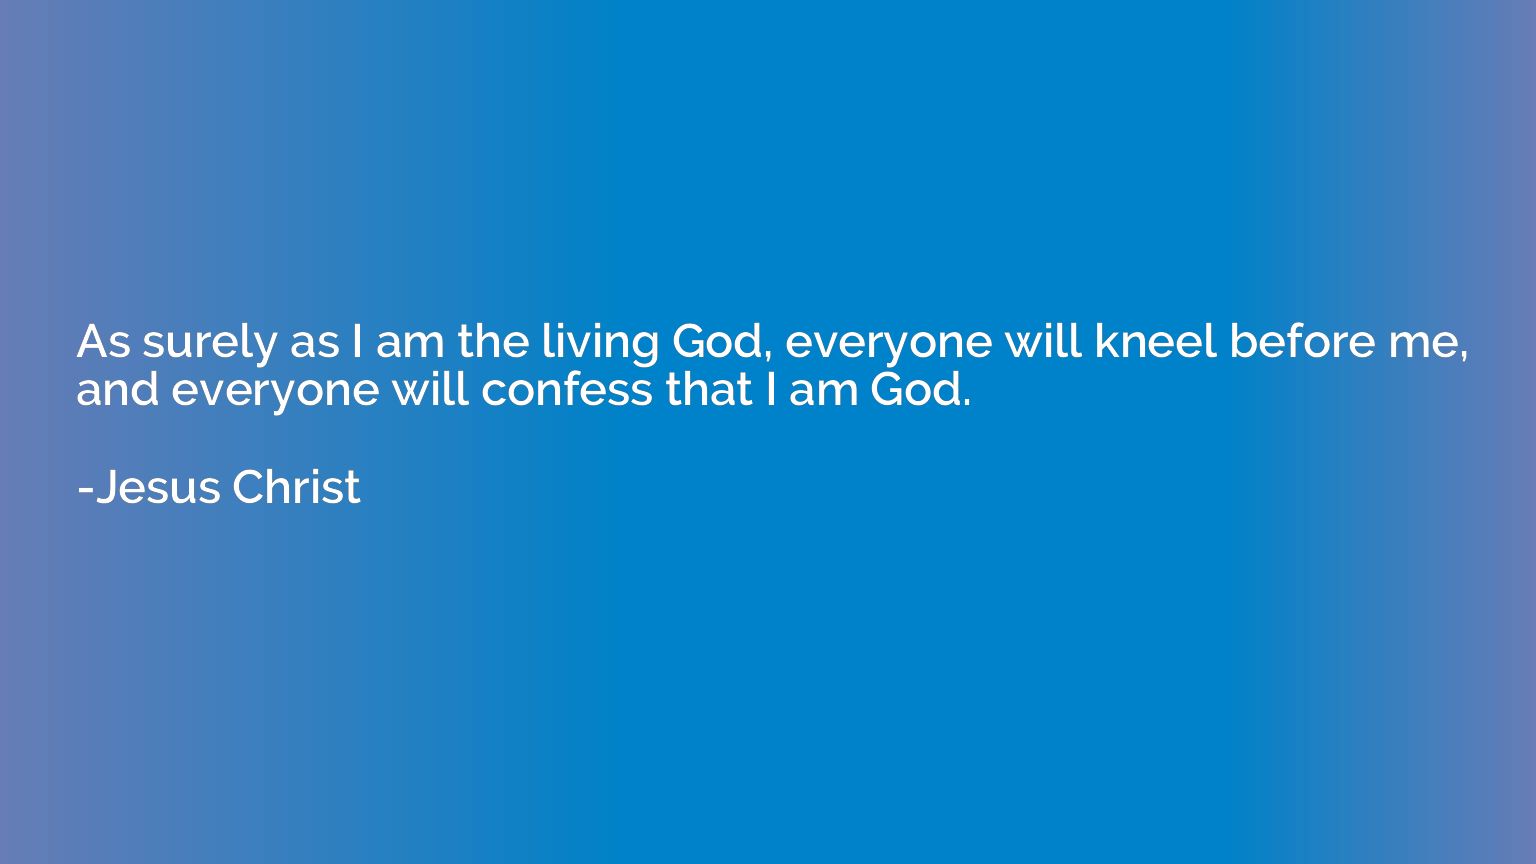 As surely as I am the living God, everyone will kneel before